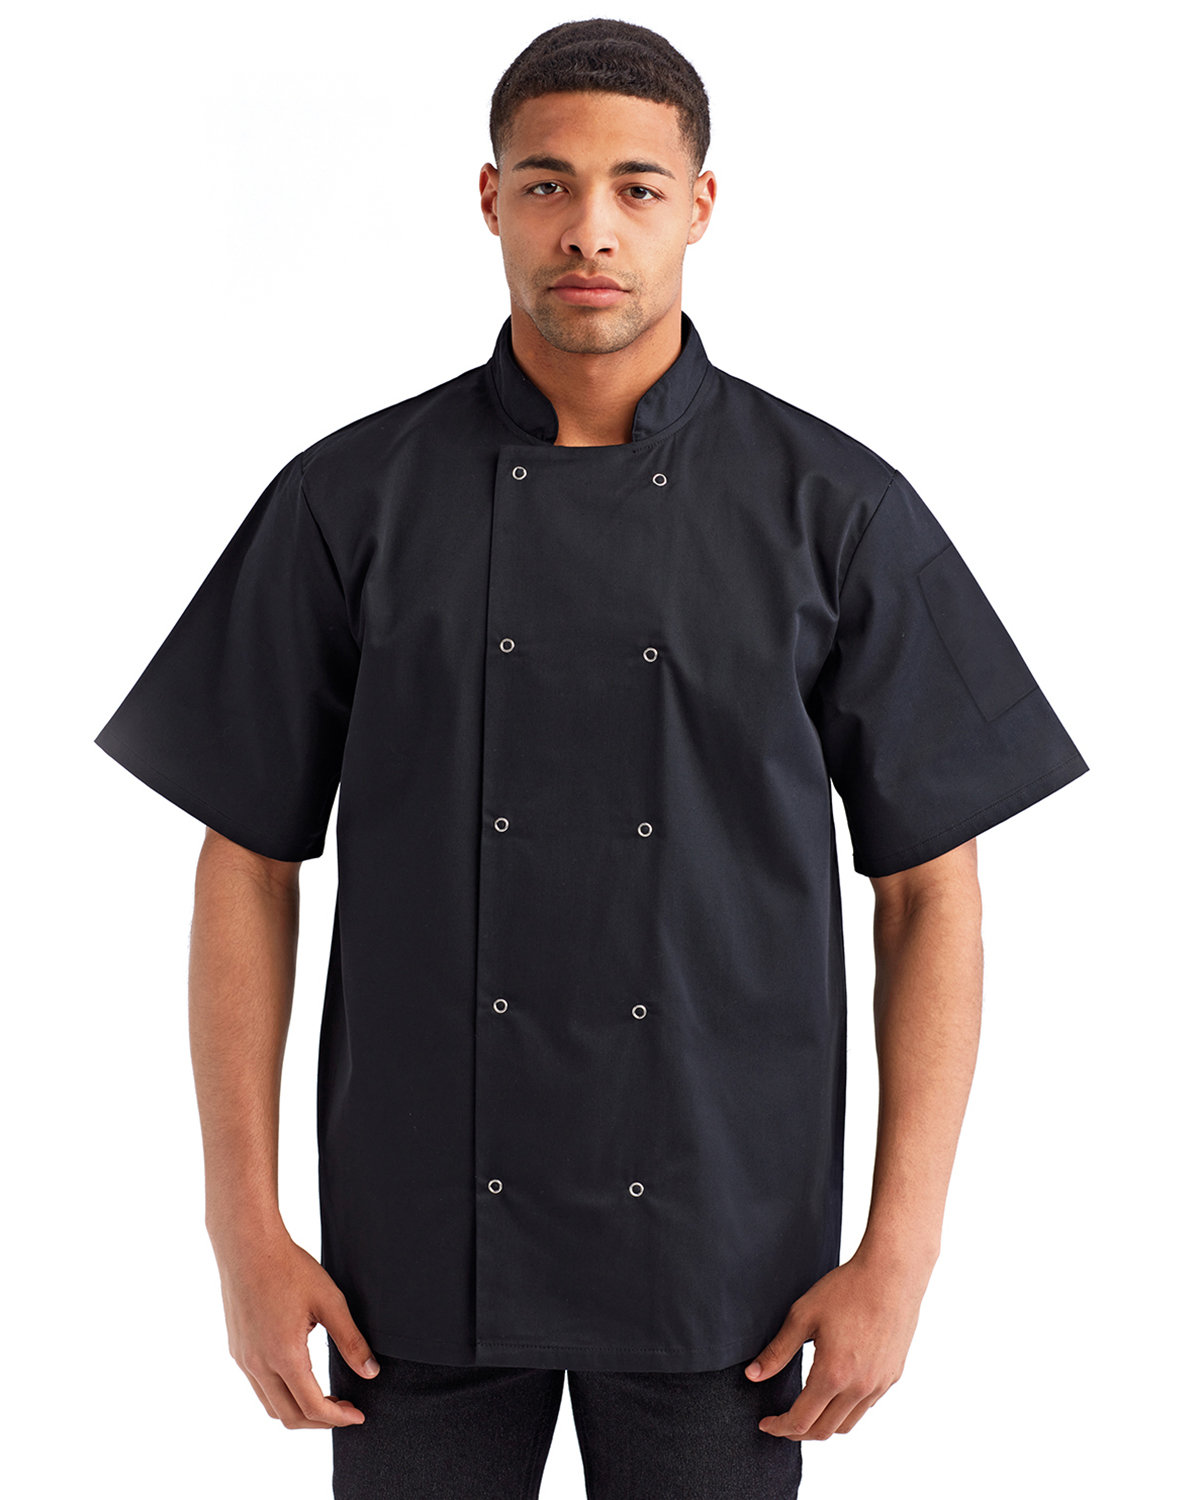 Artisan Collection by Reprime Unisex Studded Front Short-Sleeve Chef's Coat BLACK 